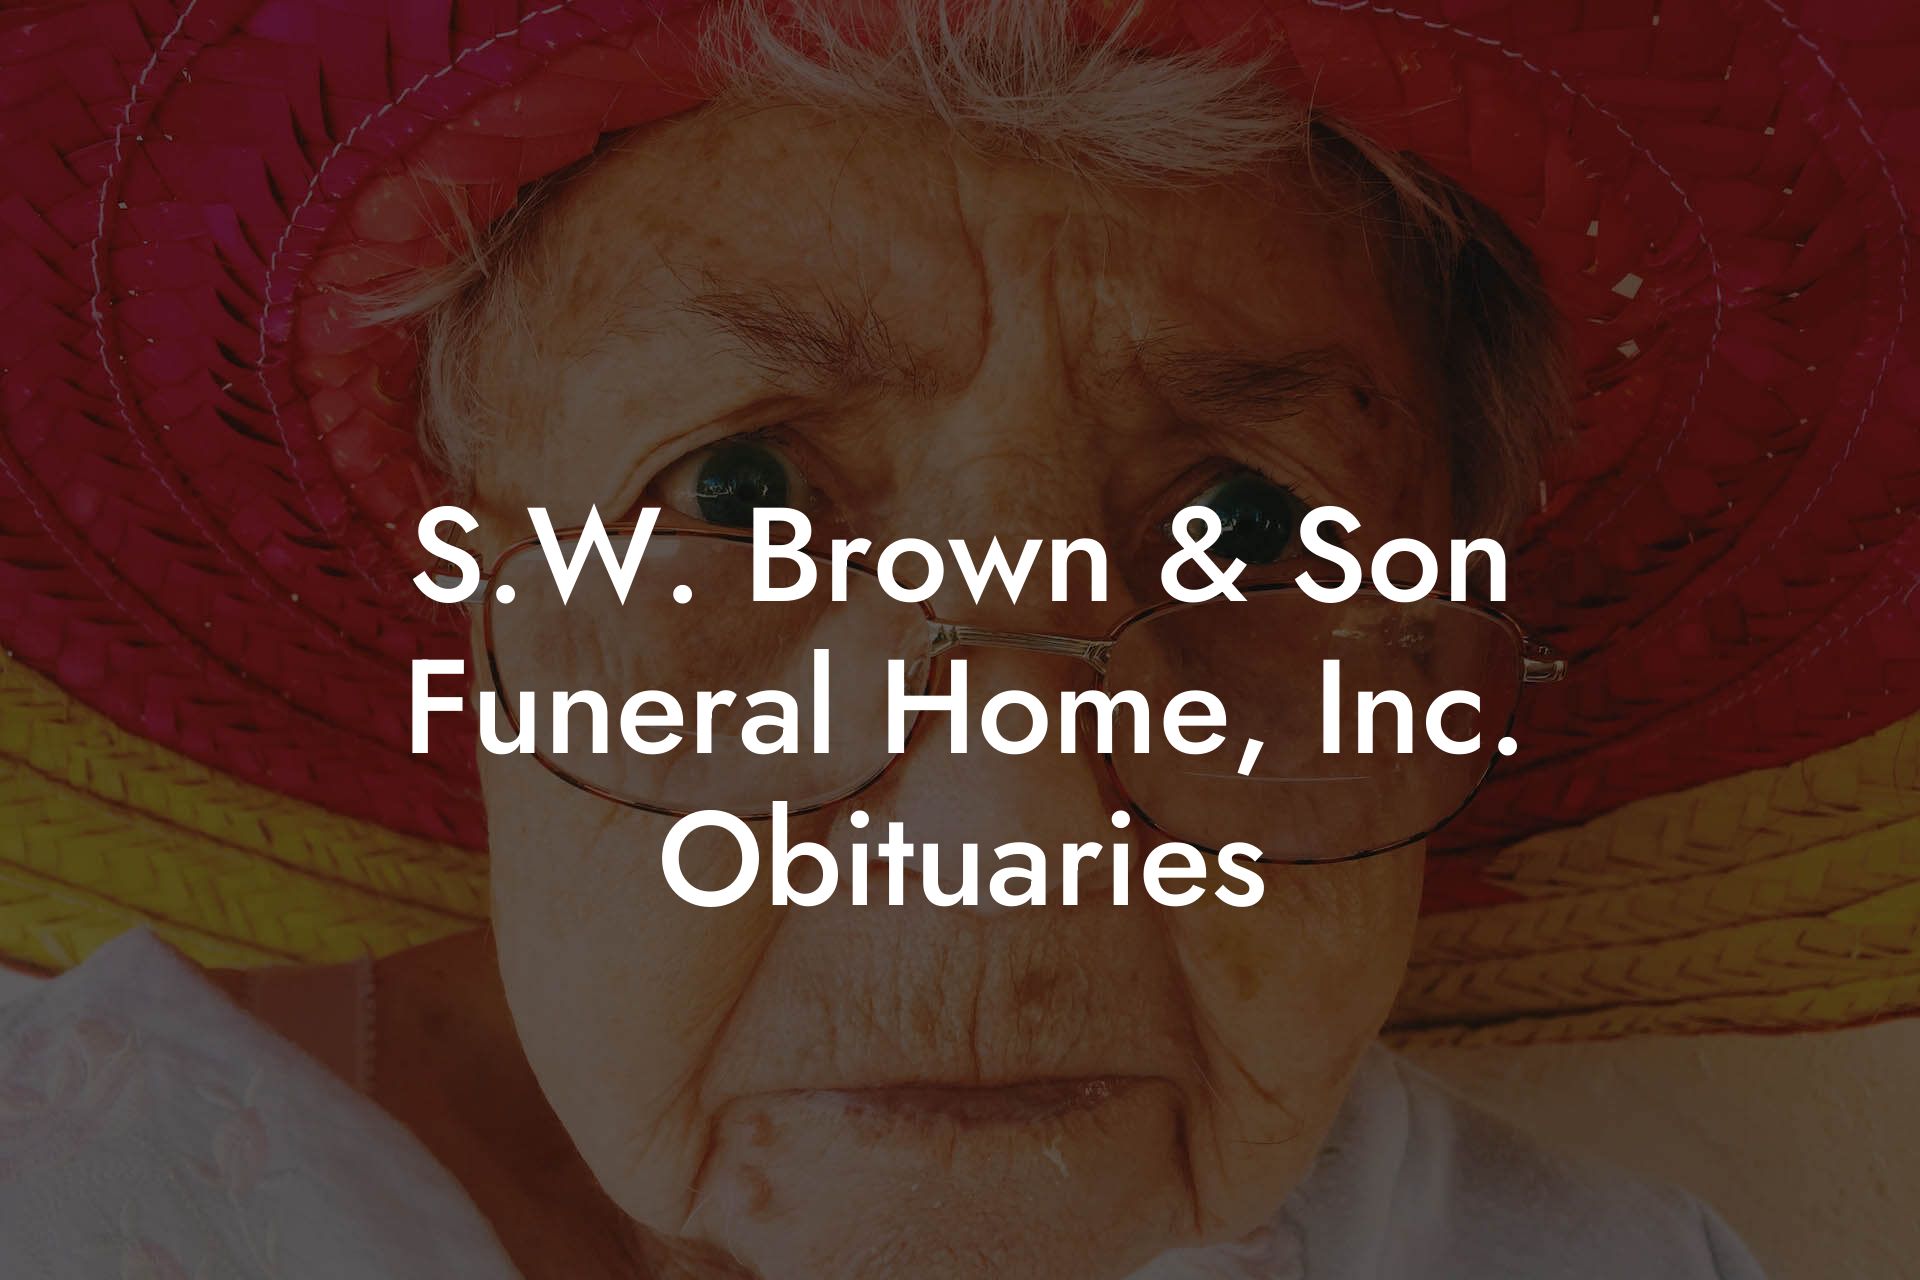 S.W. Brown & Son Funeral Home, Inc. Obituaries